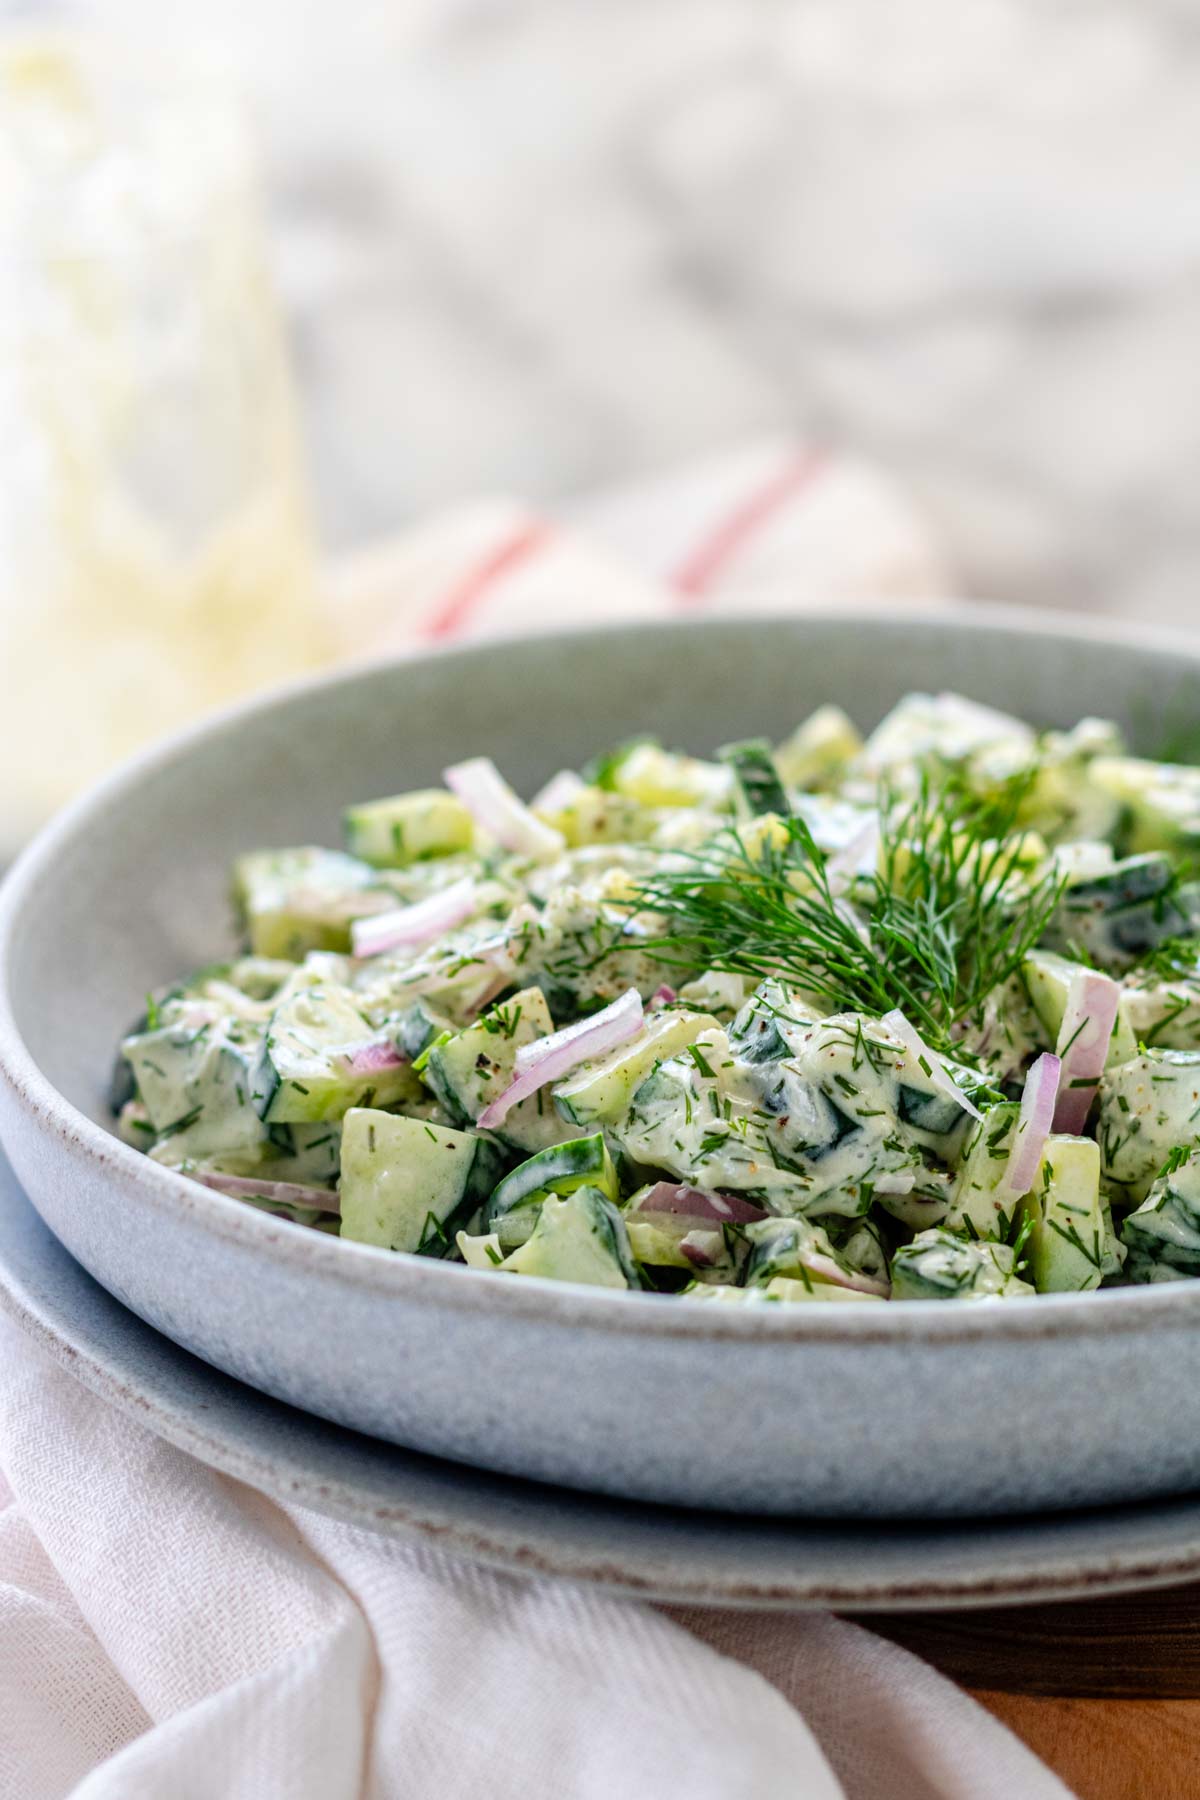 Chopped cucumbers in a bowl covered in tzatziki sauce, garnished with fresh dill.